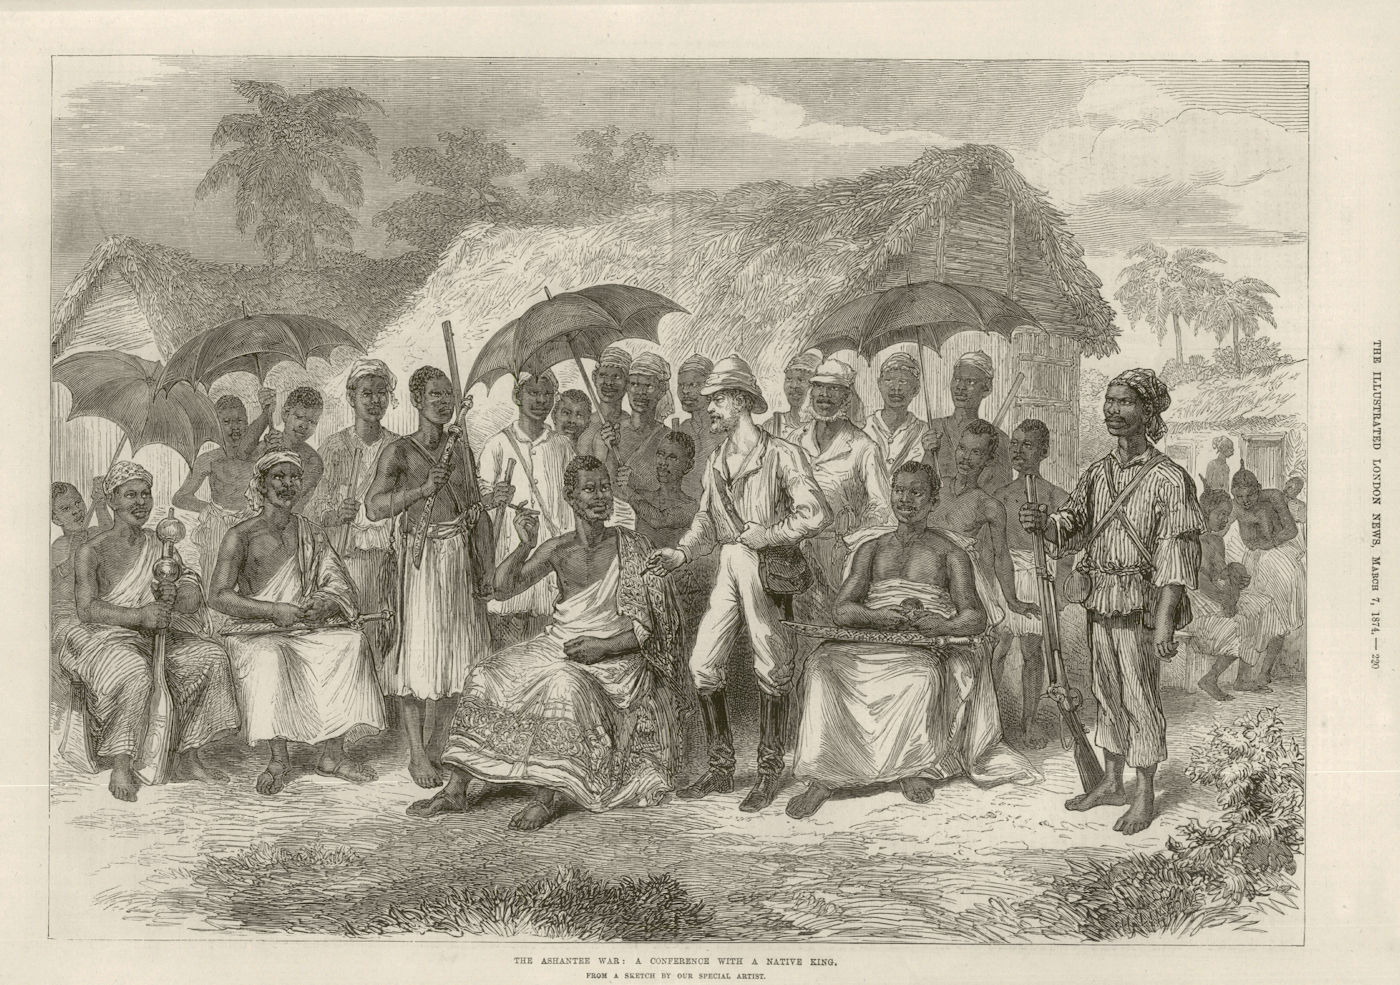 The Third Anglo-Ashanti War: A conference with a native king. Ghana 1874 print